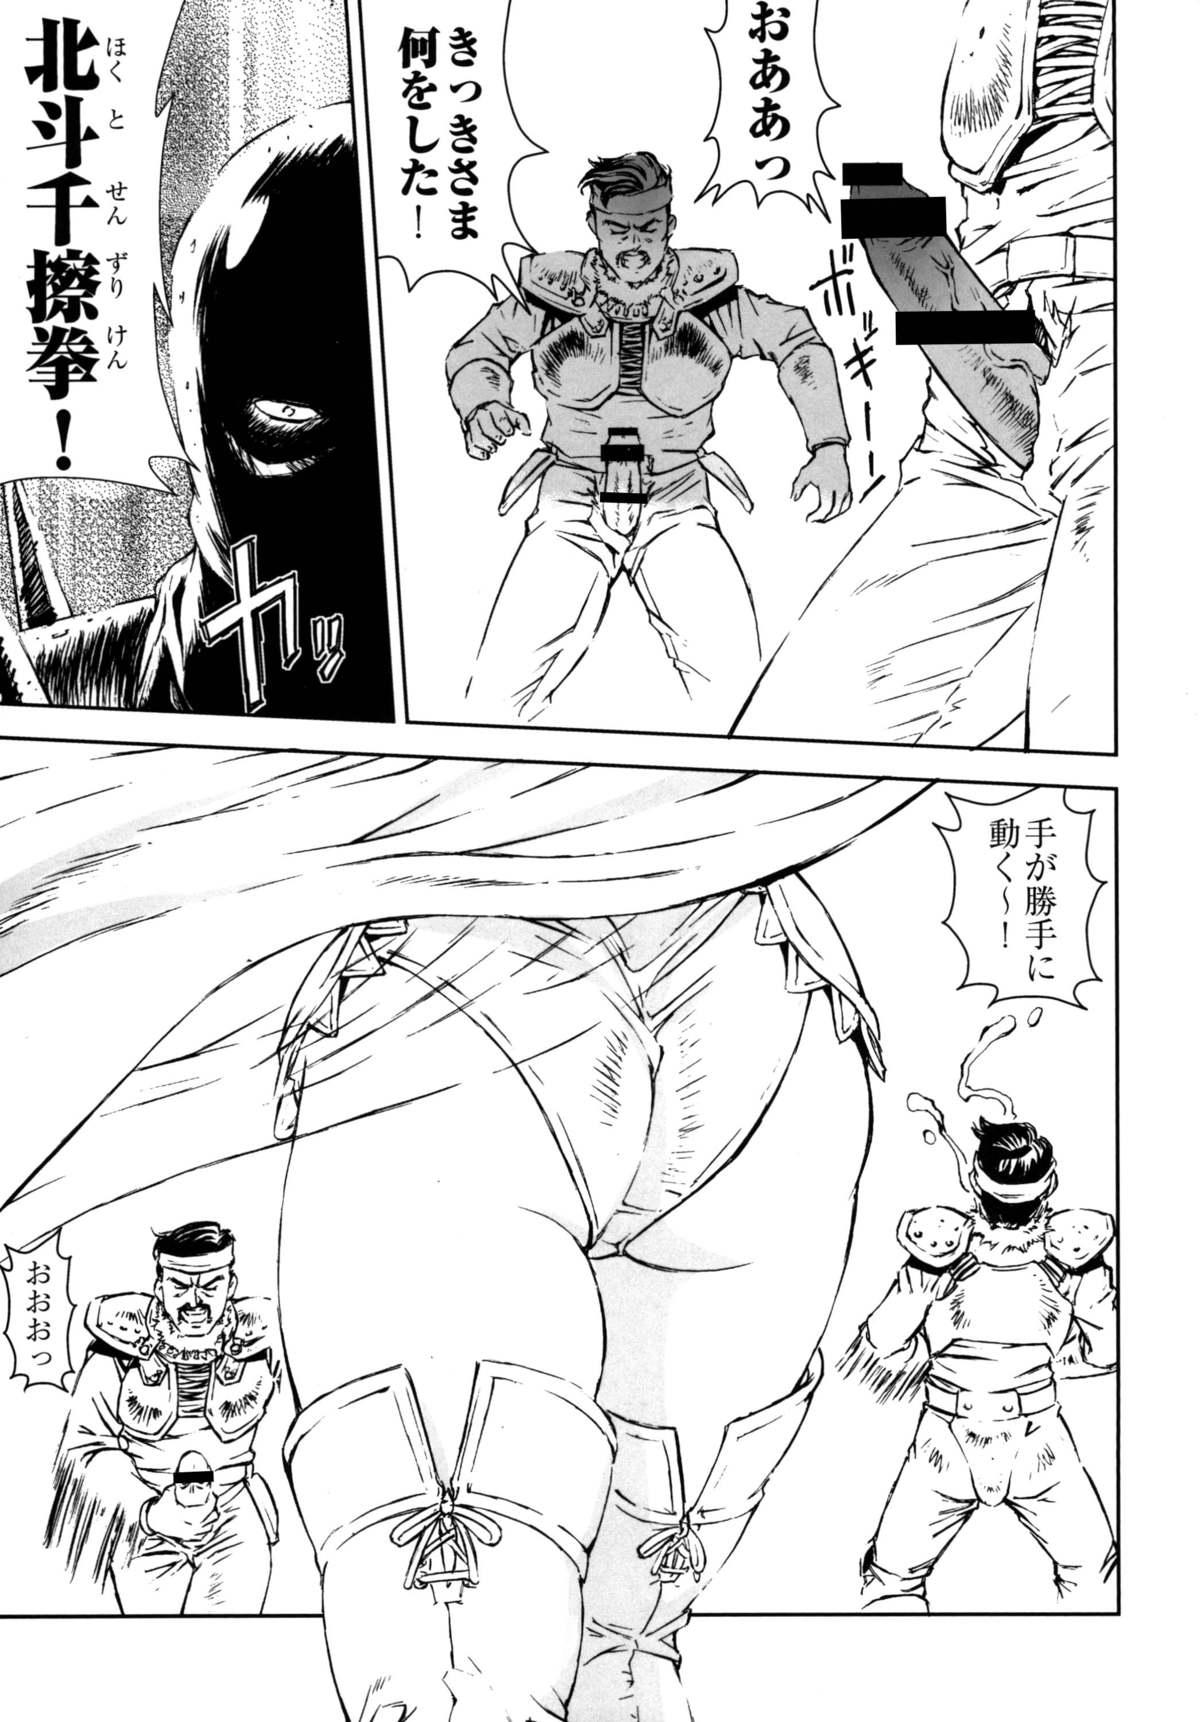 Coroa HOT BITCH JUMP 2 - Kochikame Fist of the north star Hot Cunt - Page 6